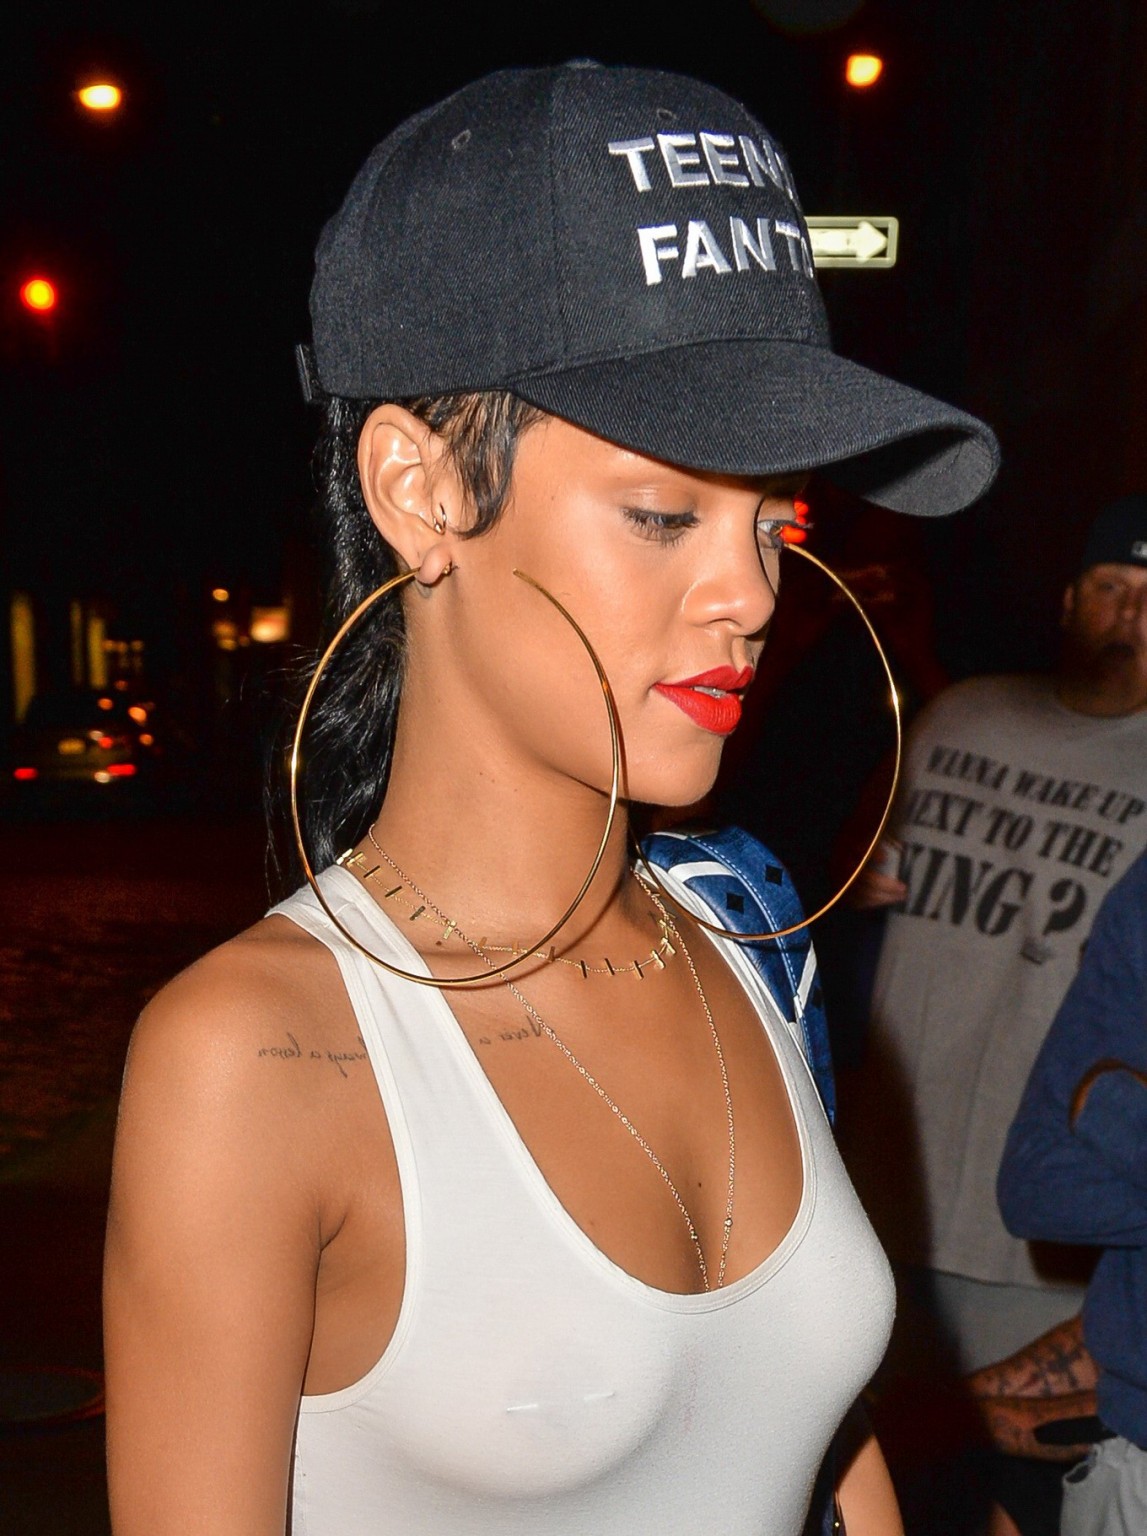 Rihanna braless wearing tight white see-through top and hotpants arriving at her #75219654